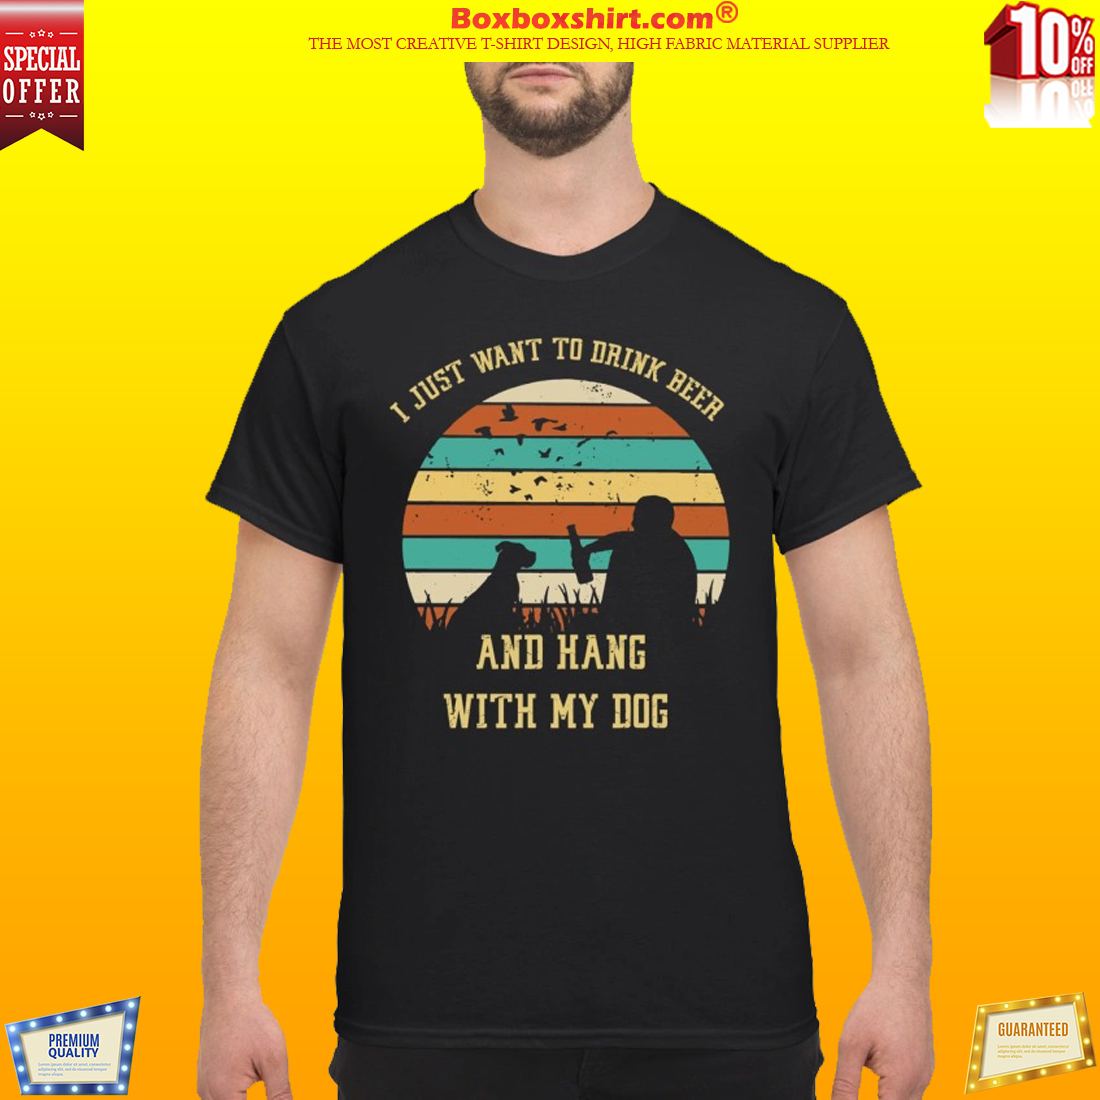 I just want to drink beer and hang with my dog classic shirt